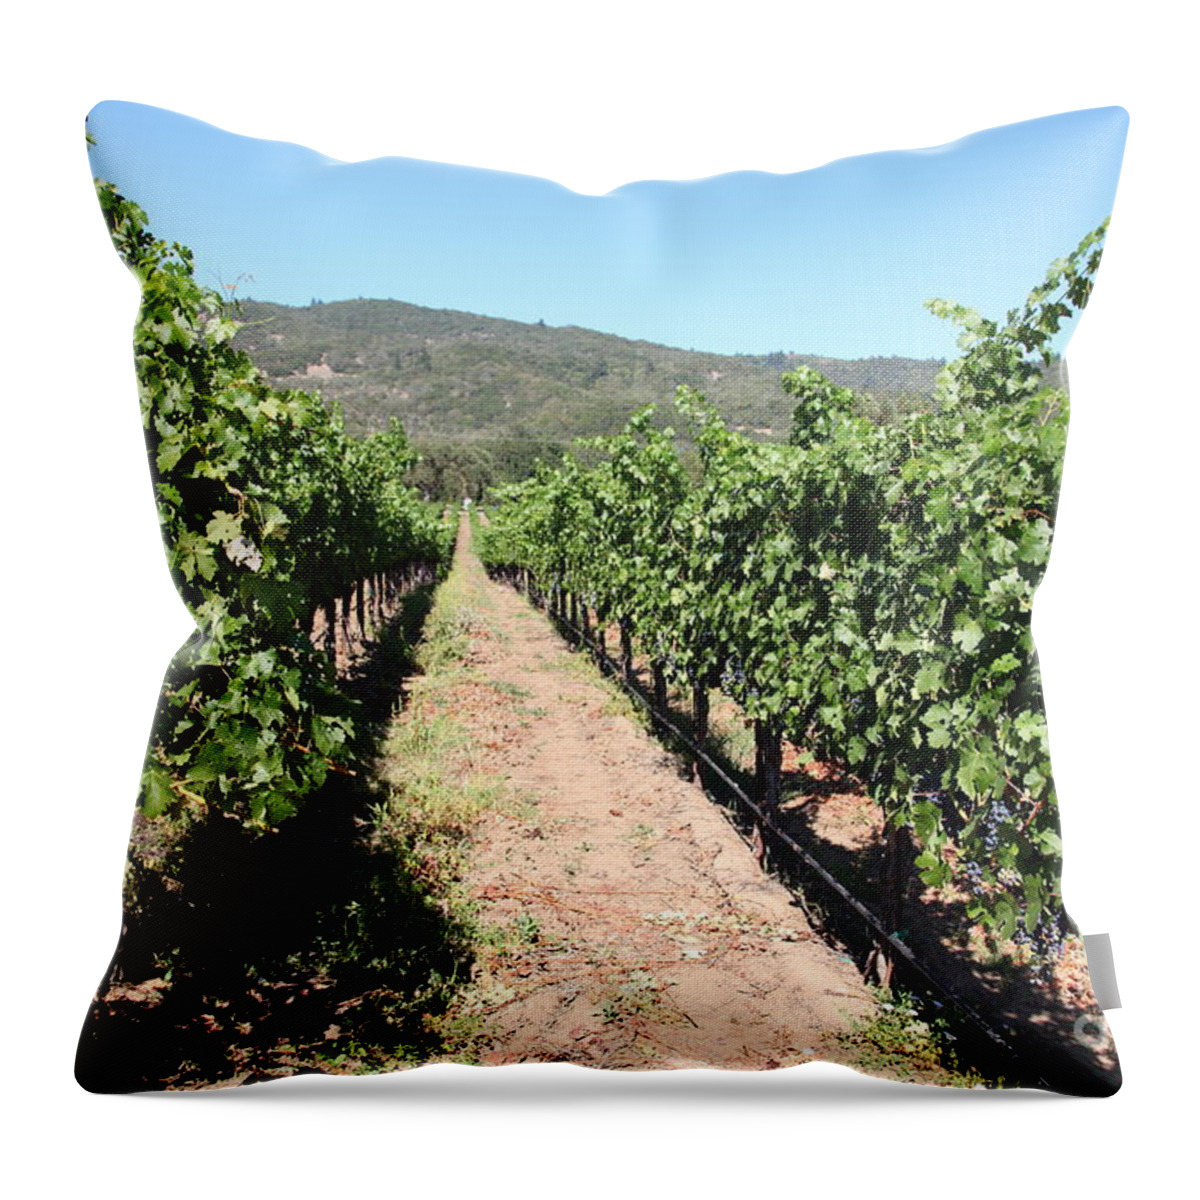 Vineyard Throw Pillow featuring the photograph Sonoma Vineyards In The Sonoma California Wine Country 5D24638 by Wingsdomain Art and Photography